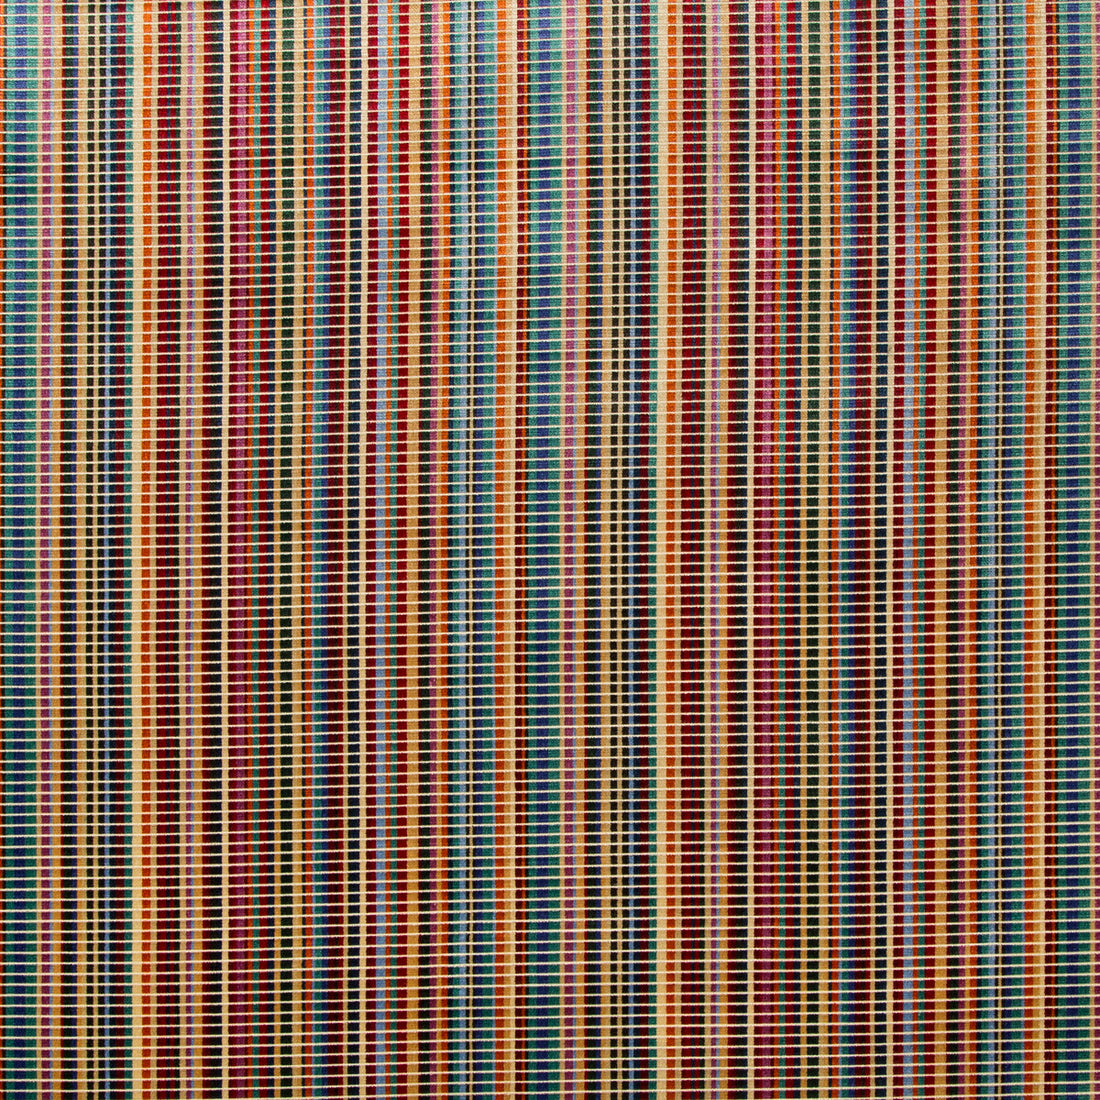 Burton Velvet fabric in multi color - pattern 2019113.459.0 - by Lee Jofa in the Manor House collection